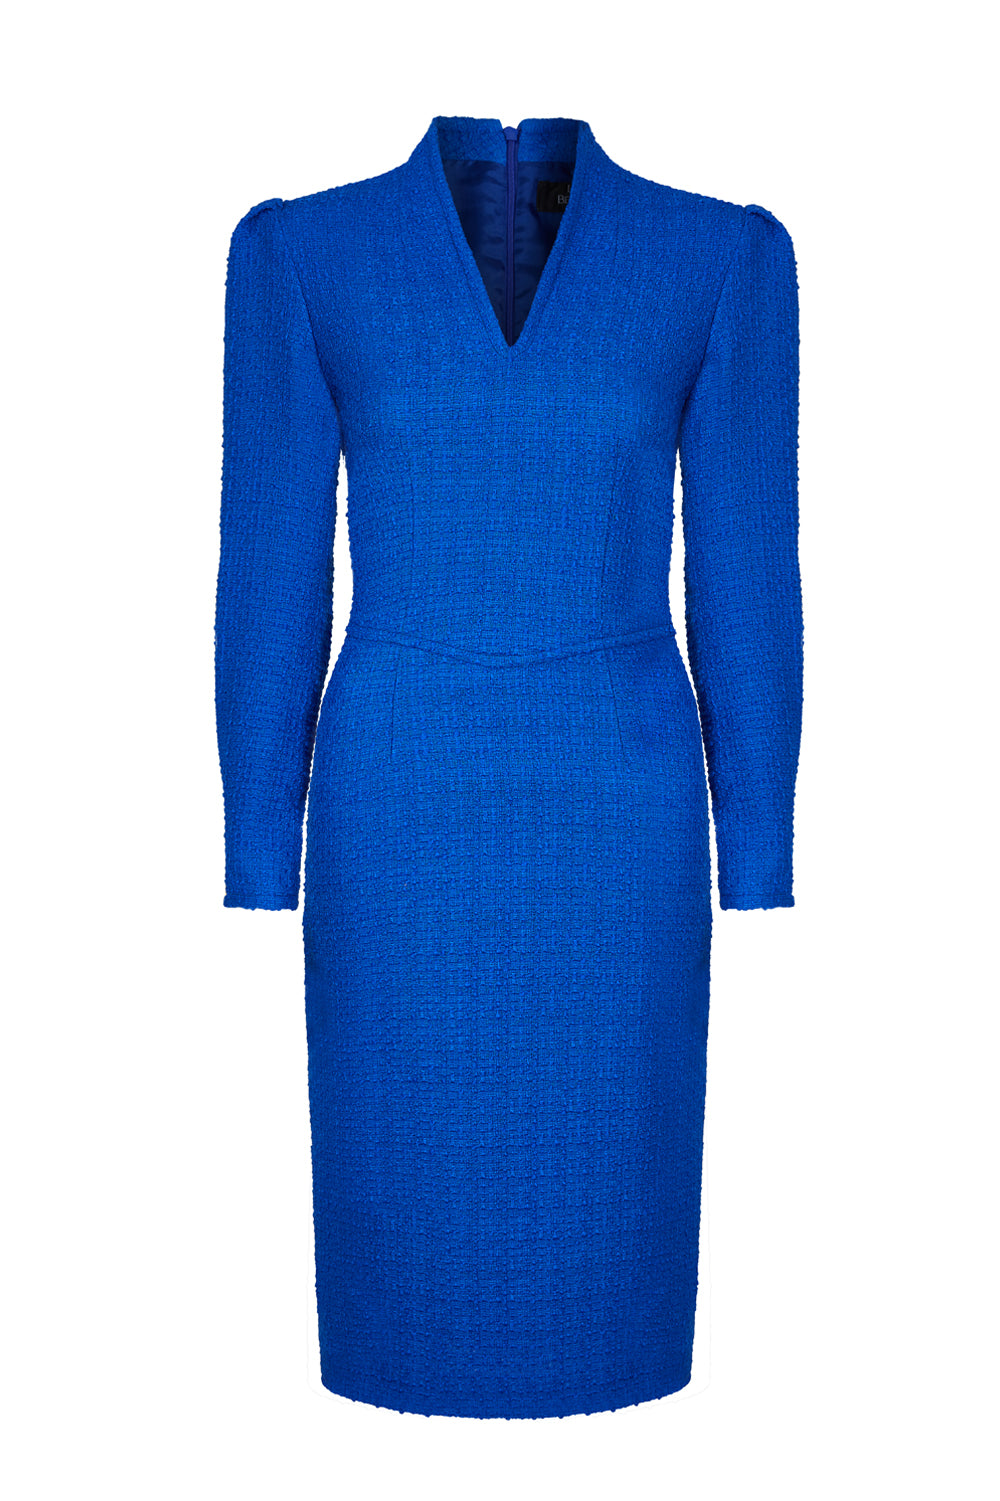 Royal Blue Fitted Dress with Long Sleeves and High Neck - Tricia